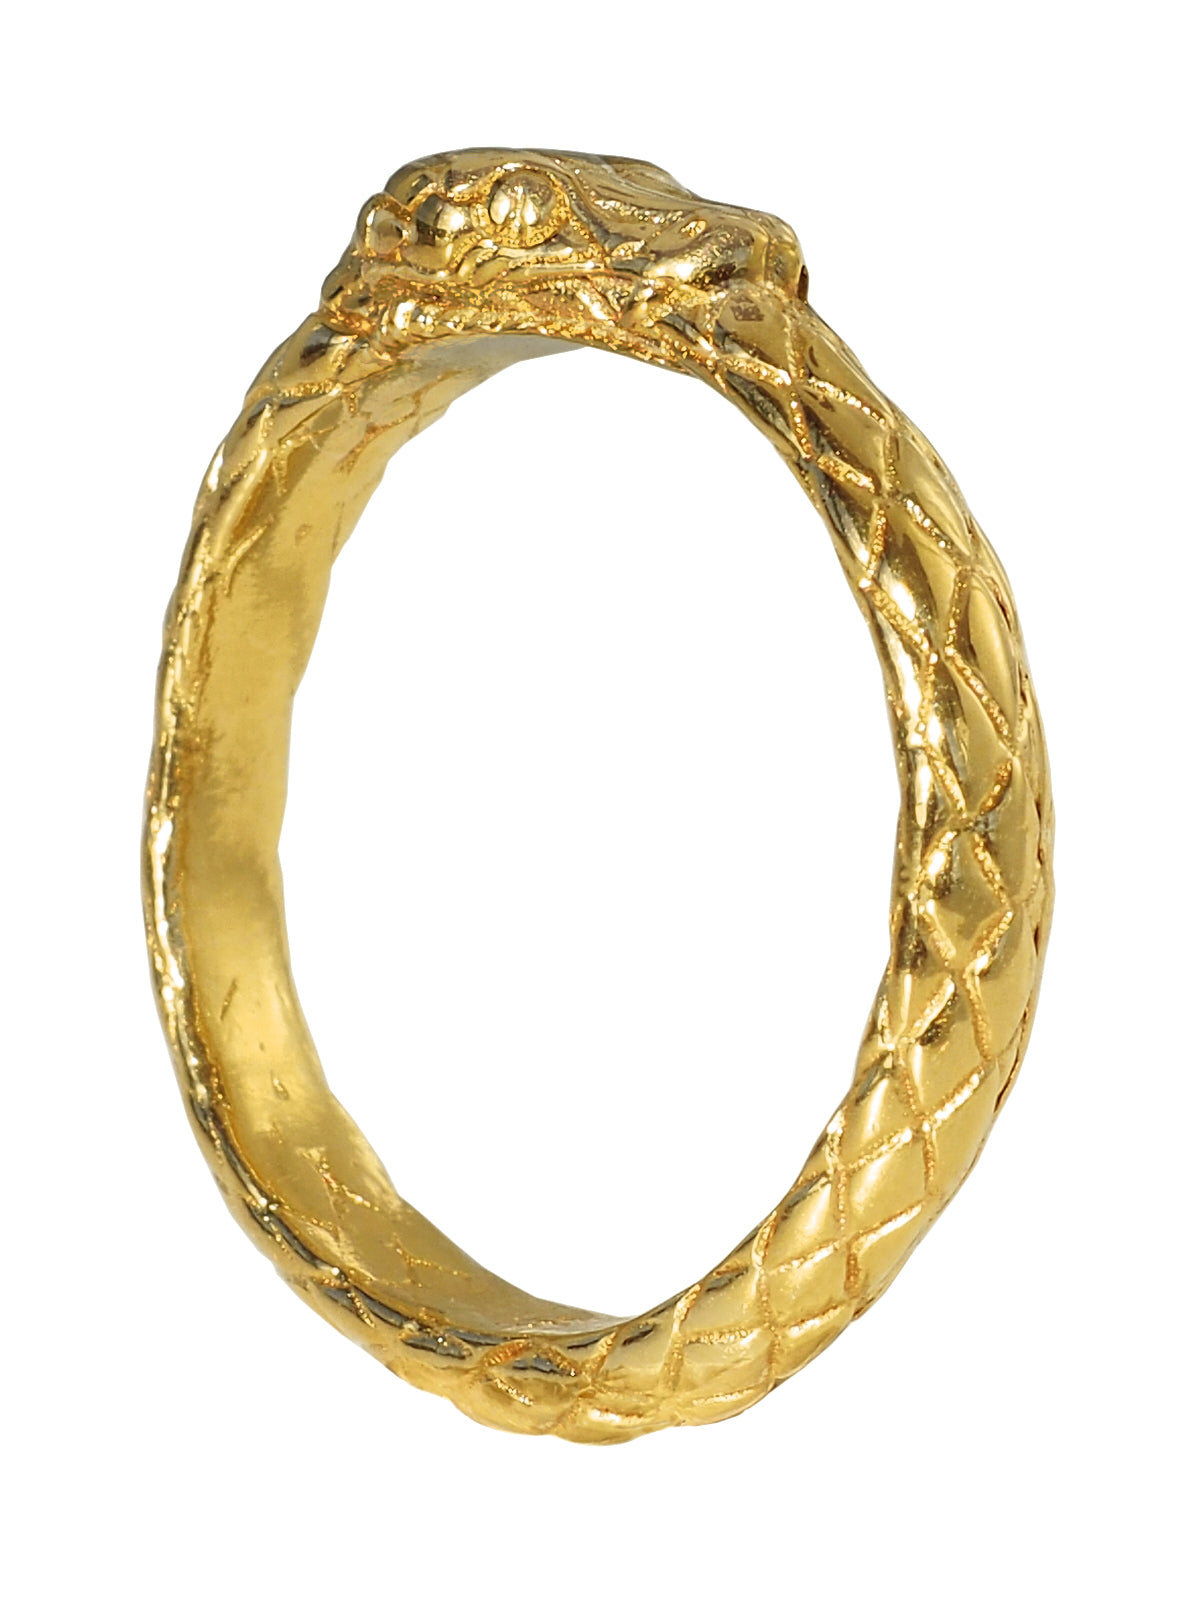 Ouroboros Ring. Gold Plated